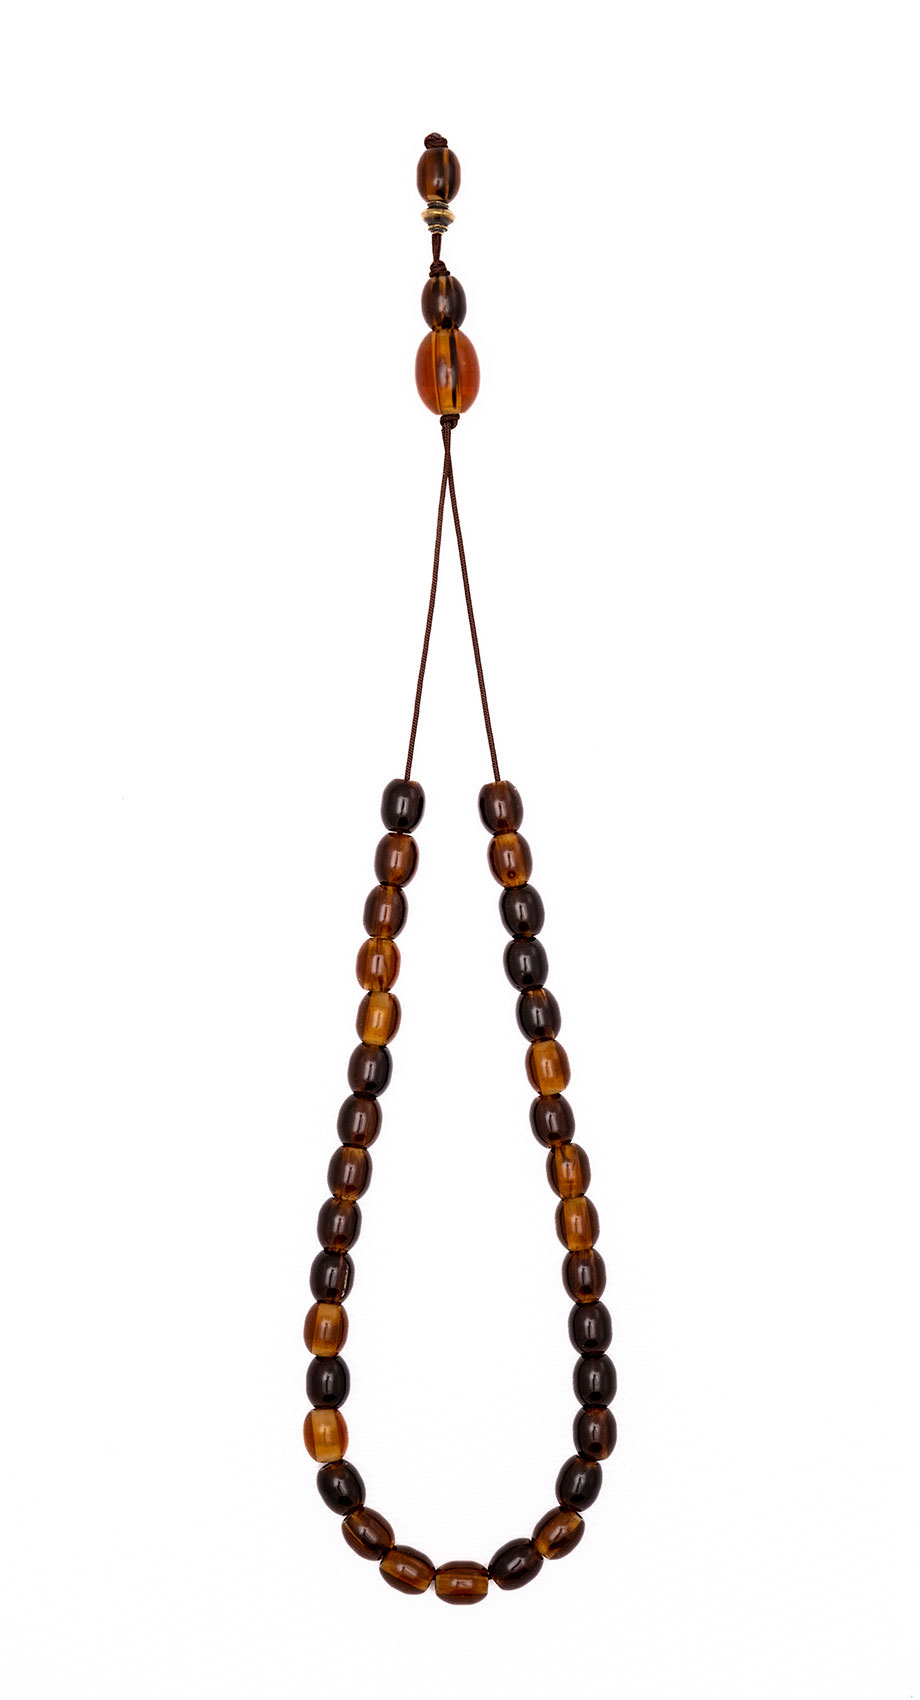 Artificial resin  (Transparent brown with water-like shades) 33 beads